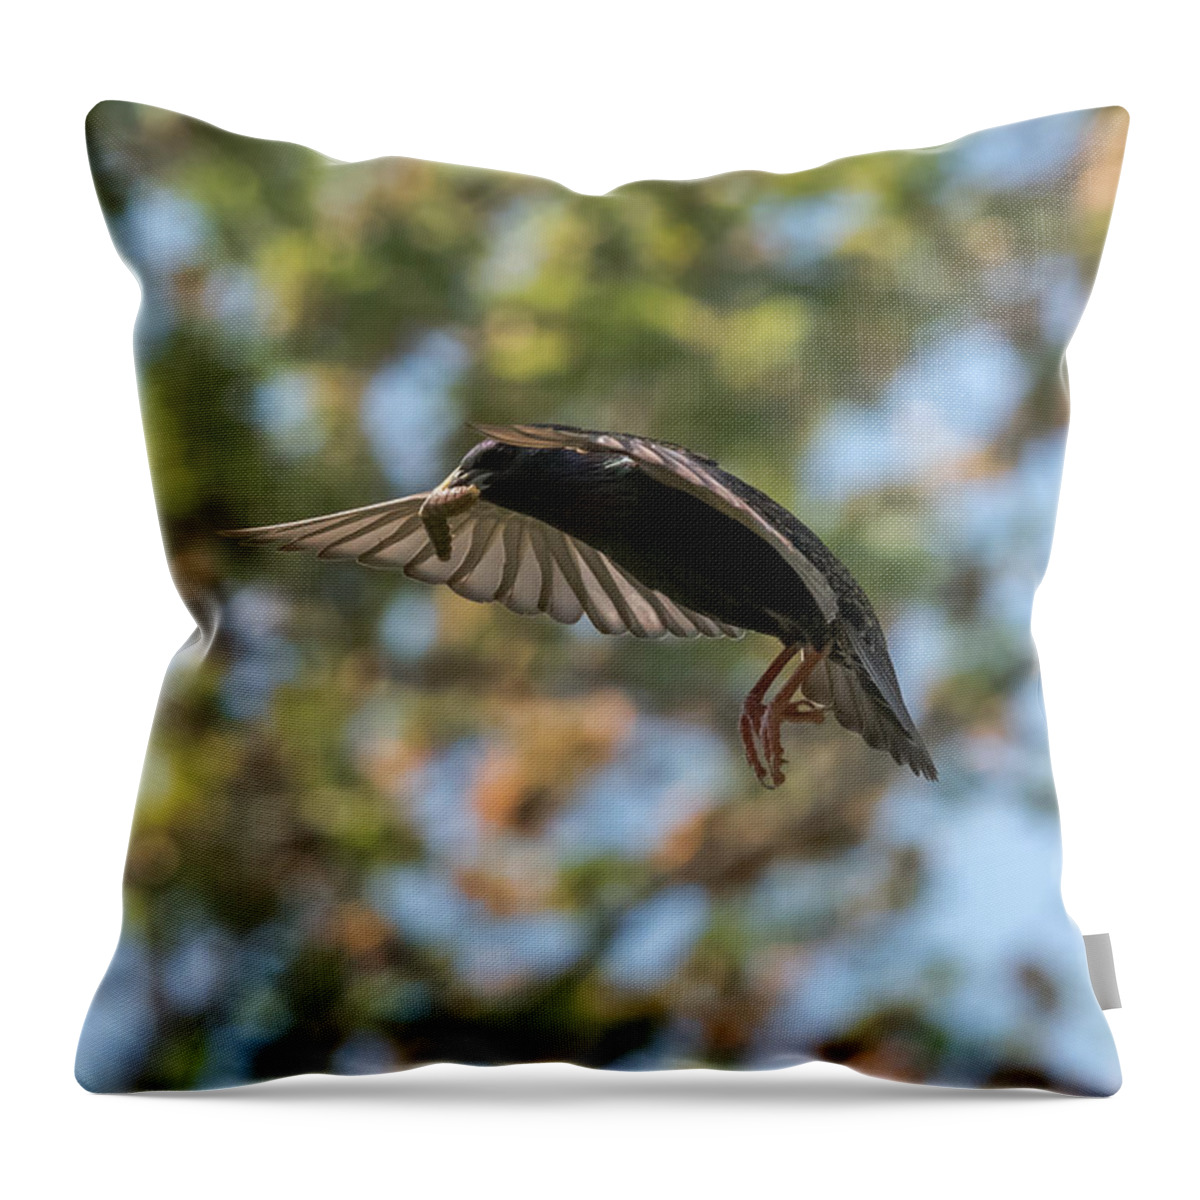 Starling Throw Pillow featuring the photograph European Starling  by Holden The Moment